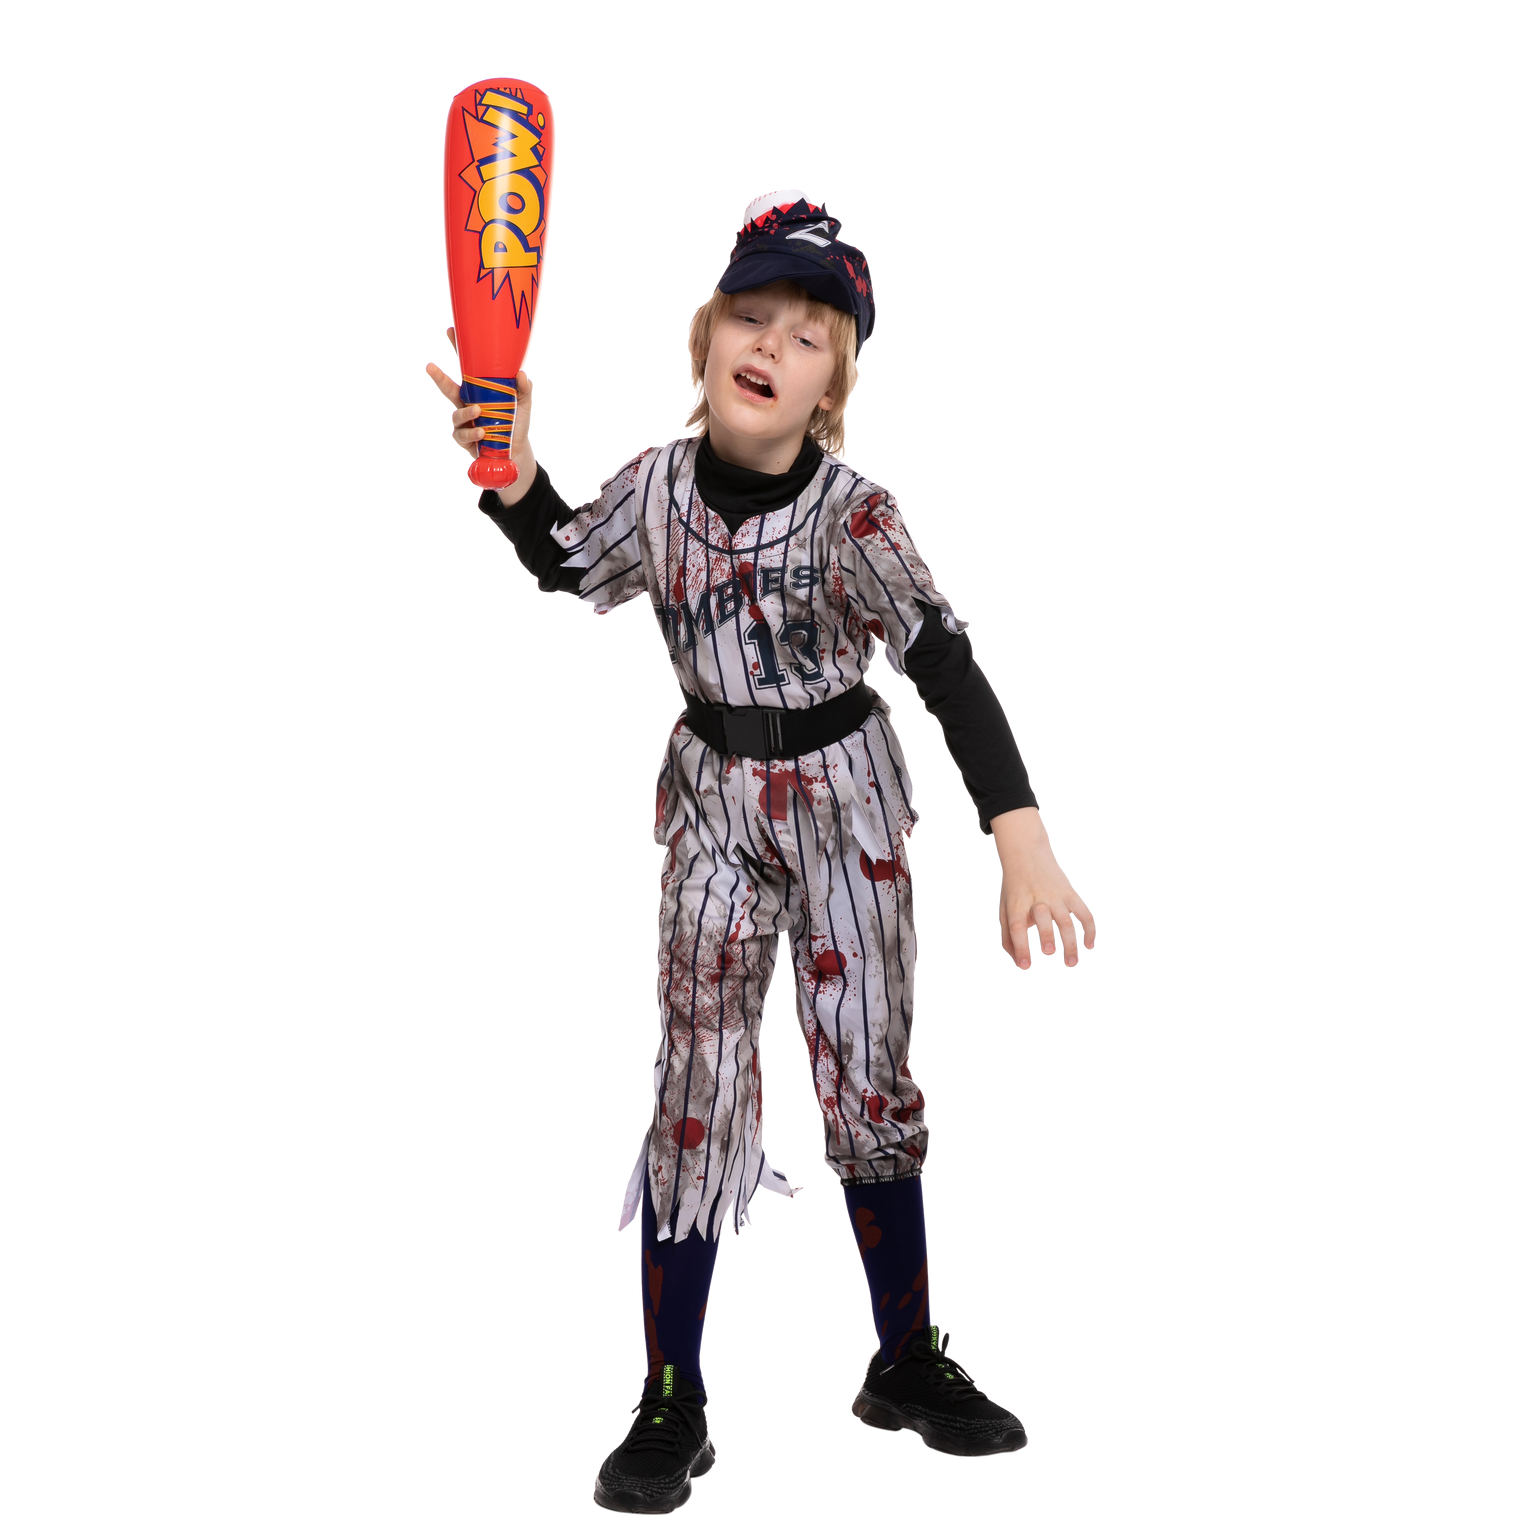 Scary Baseball Player Zombie Costume - SPOOKTACULAR